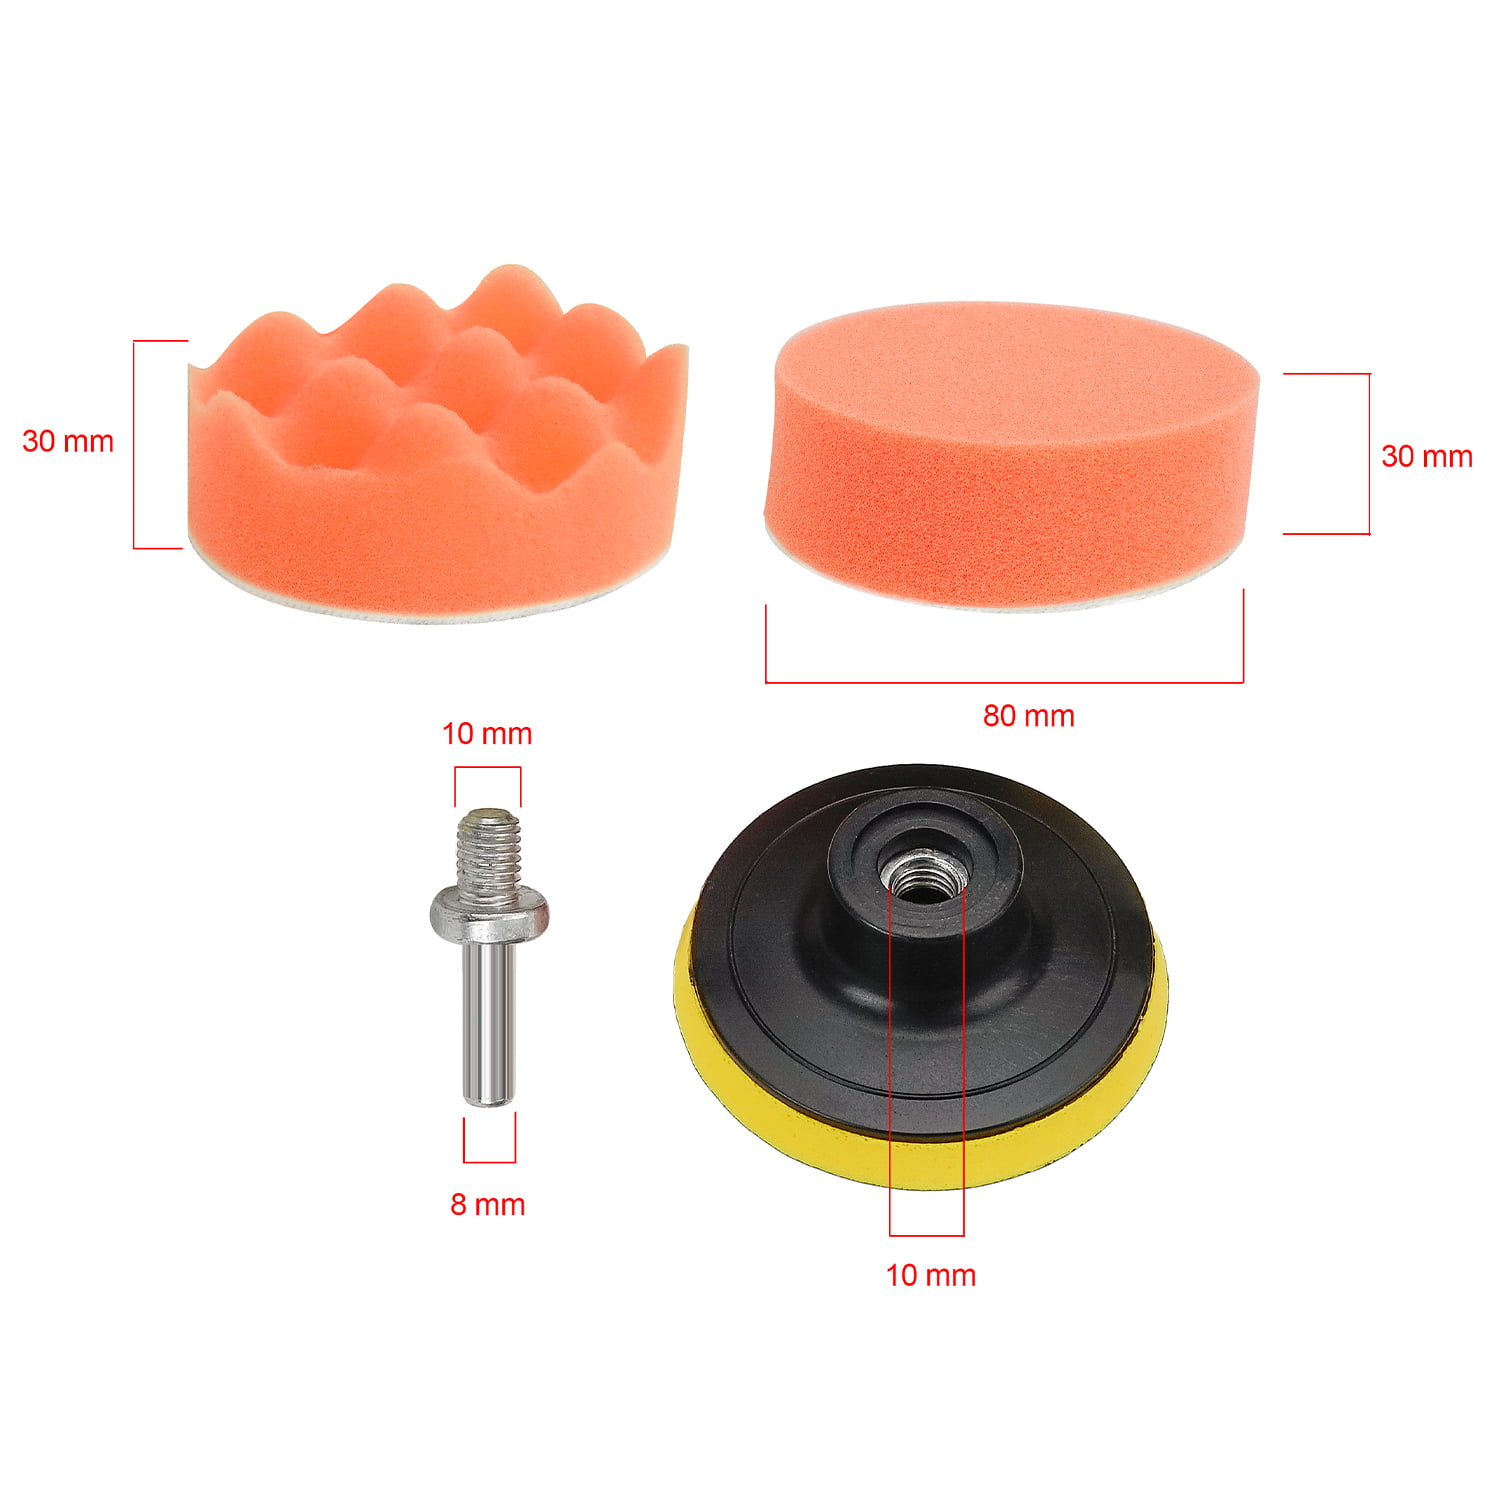 RAM-PRO 3 Car Buffing and Wax Polishing Pad Kit - Drill Attachment Tool  with Fastener Wheels